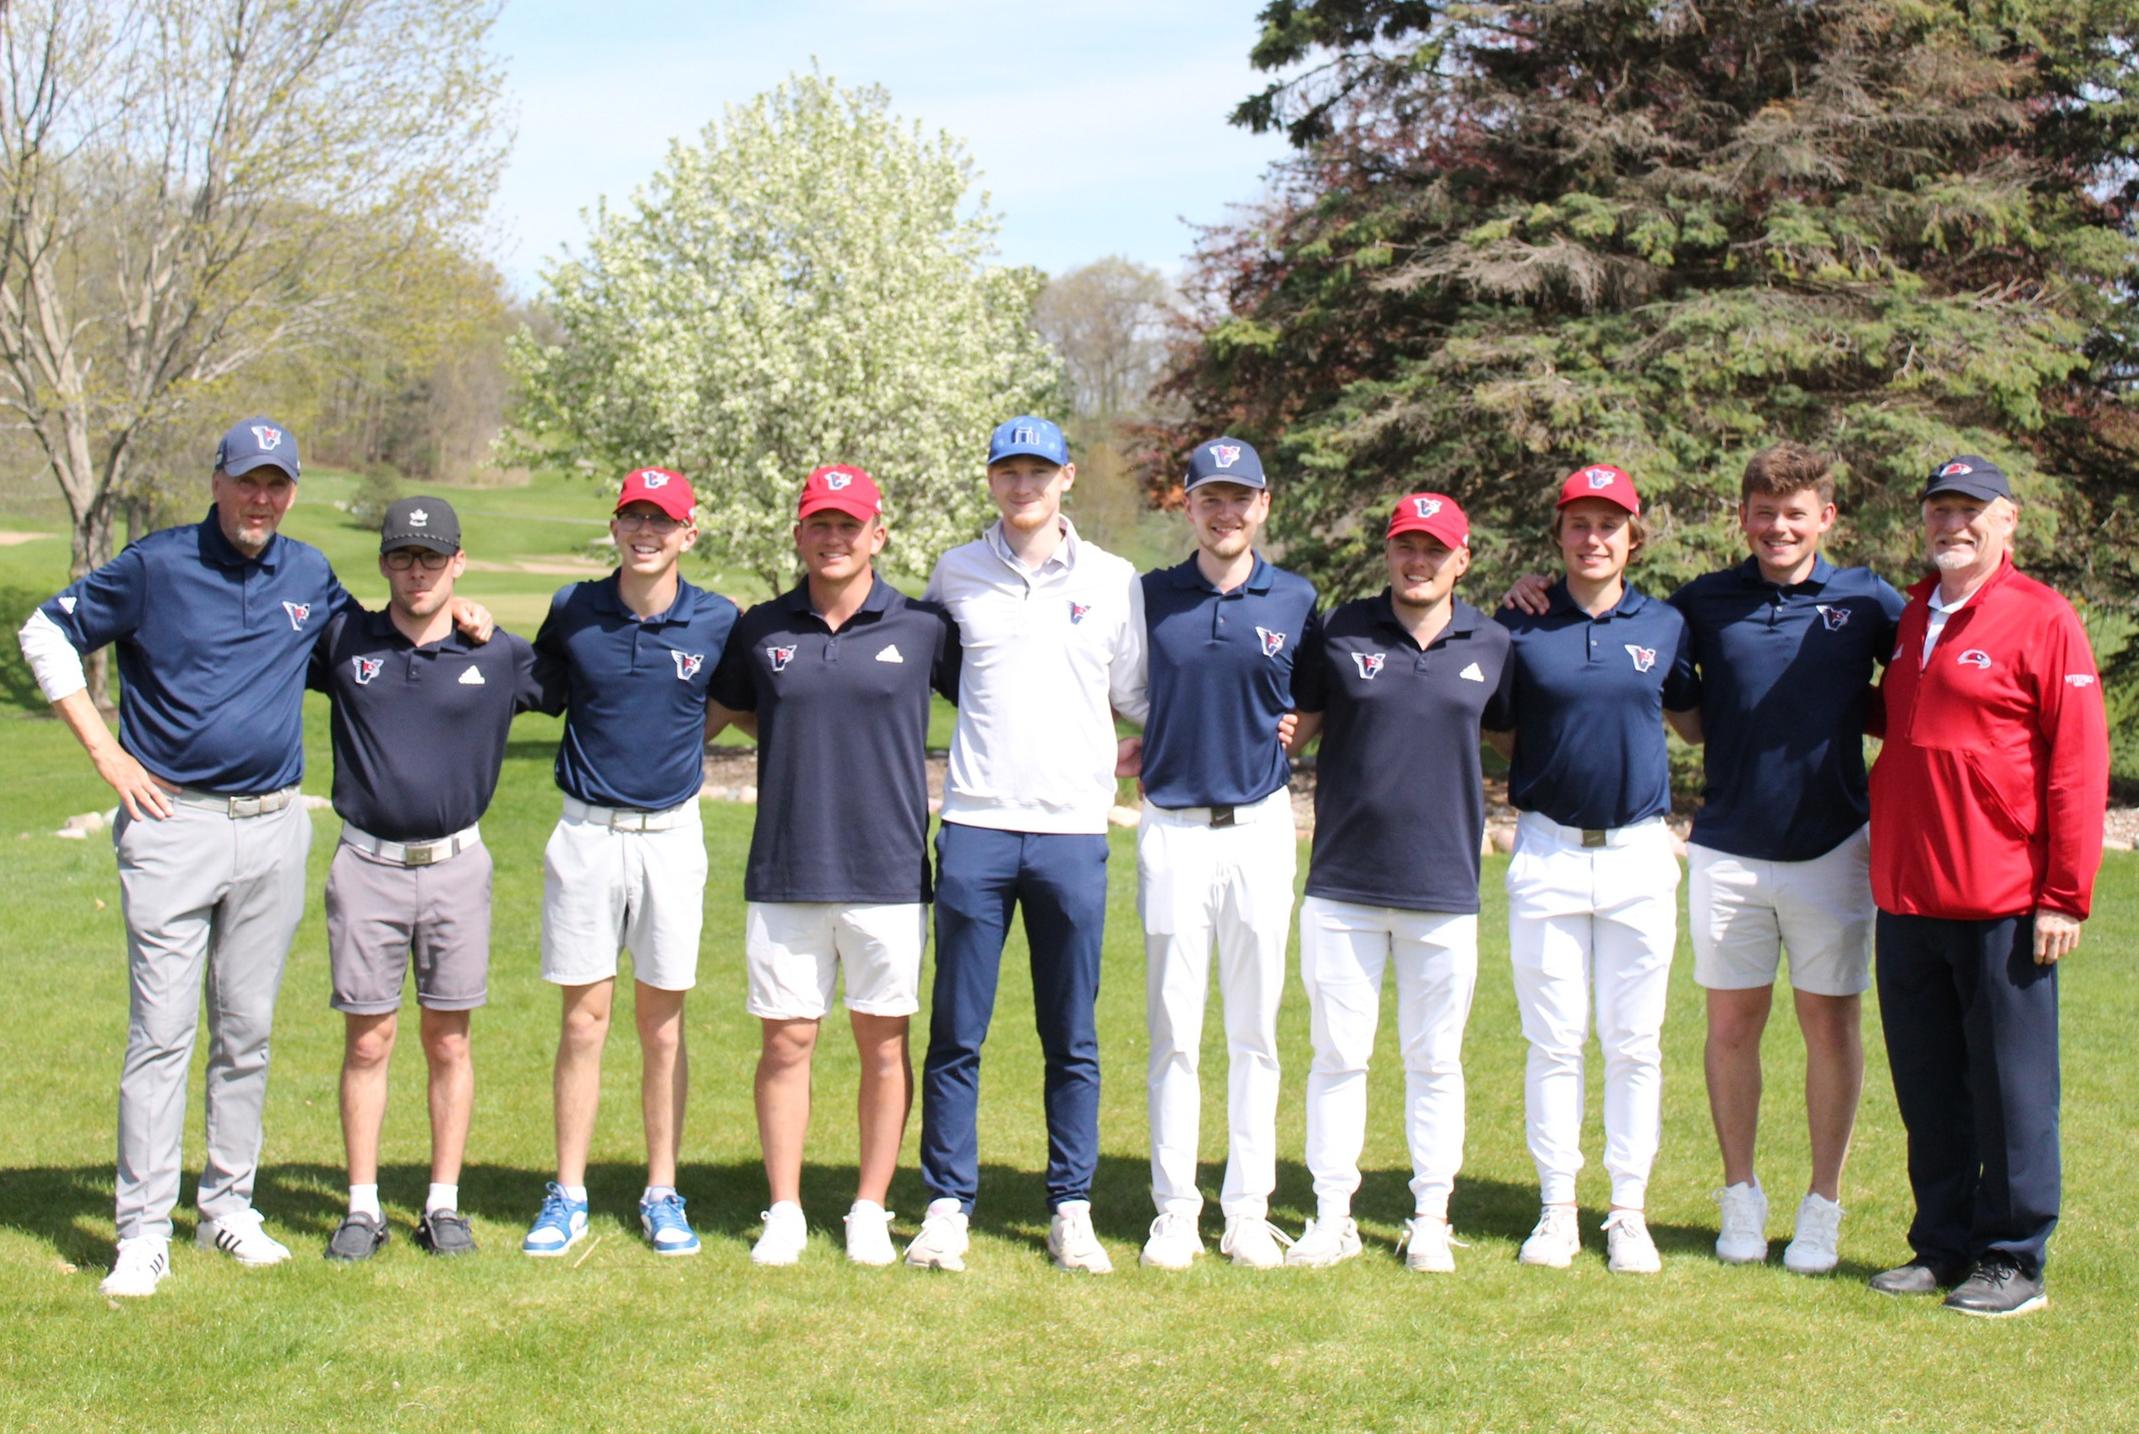 V-Hawks Place Second at Conference with all Five Earning All-NSAA